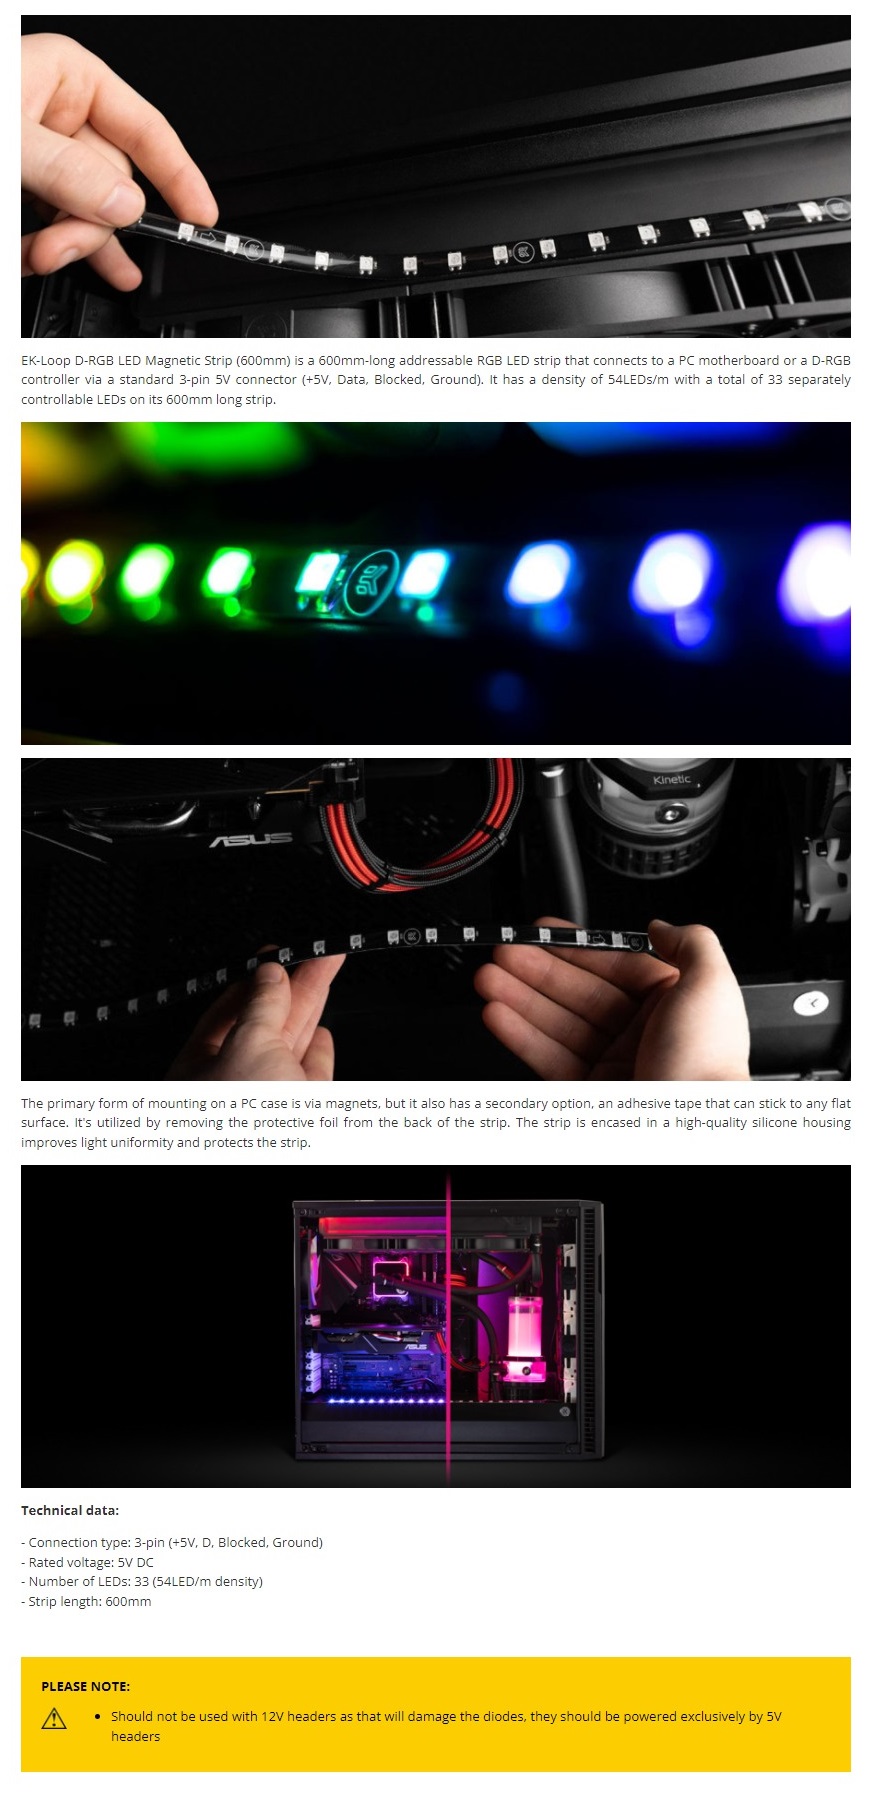 A large marketing image providing additional information about the product EK Loop D-RGB LED Magnetic Strip (600mm) - Additional alt info not provided